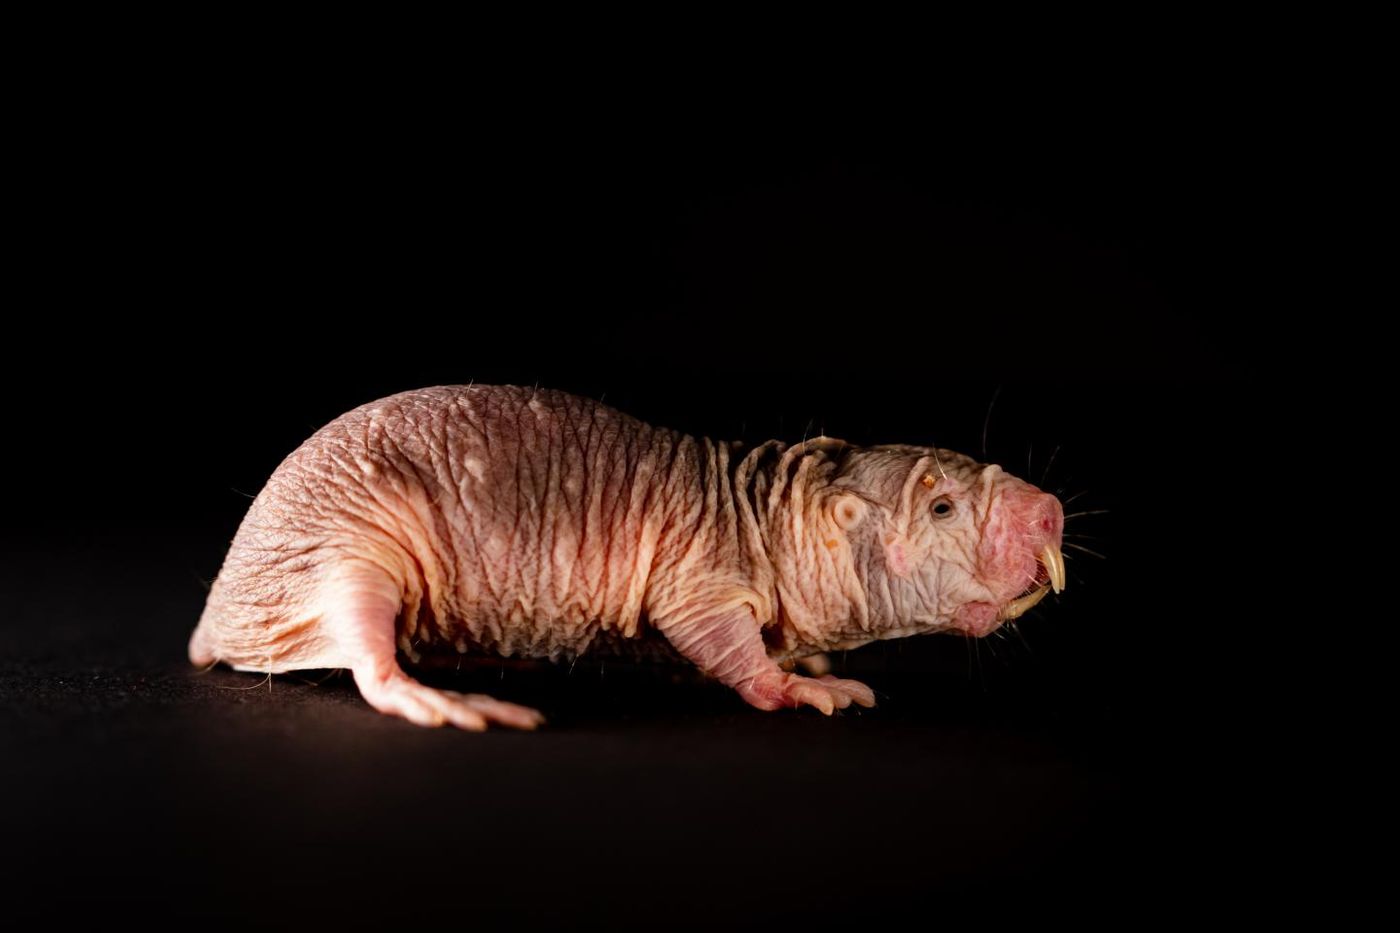 Over millions of years, naked mole-rats have cast away everything underground which uses their energy and isn't necessary to survive. This includes their fur - but also results in surprising abilities. / Credit: Felix Petermann, MDC